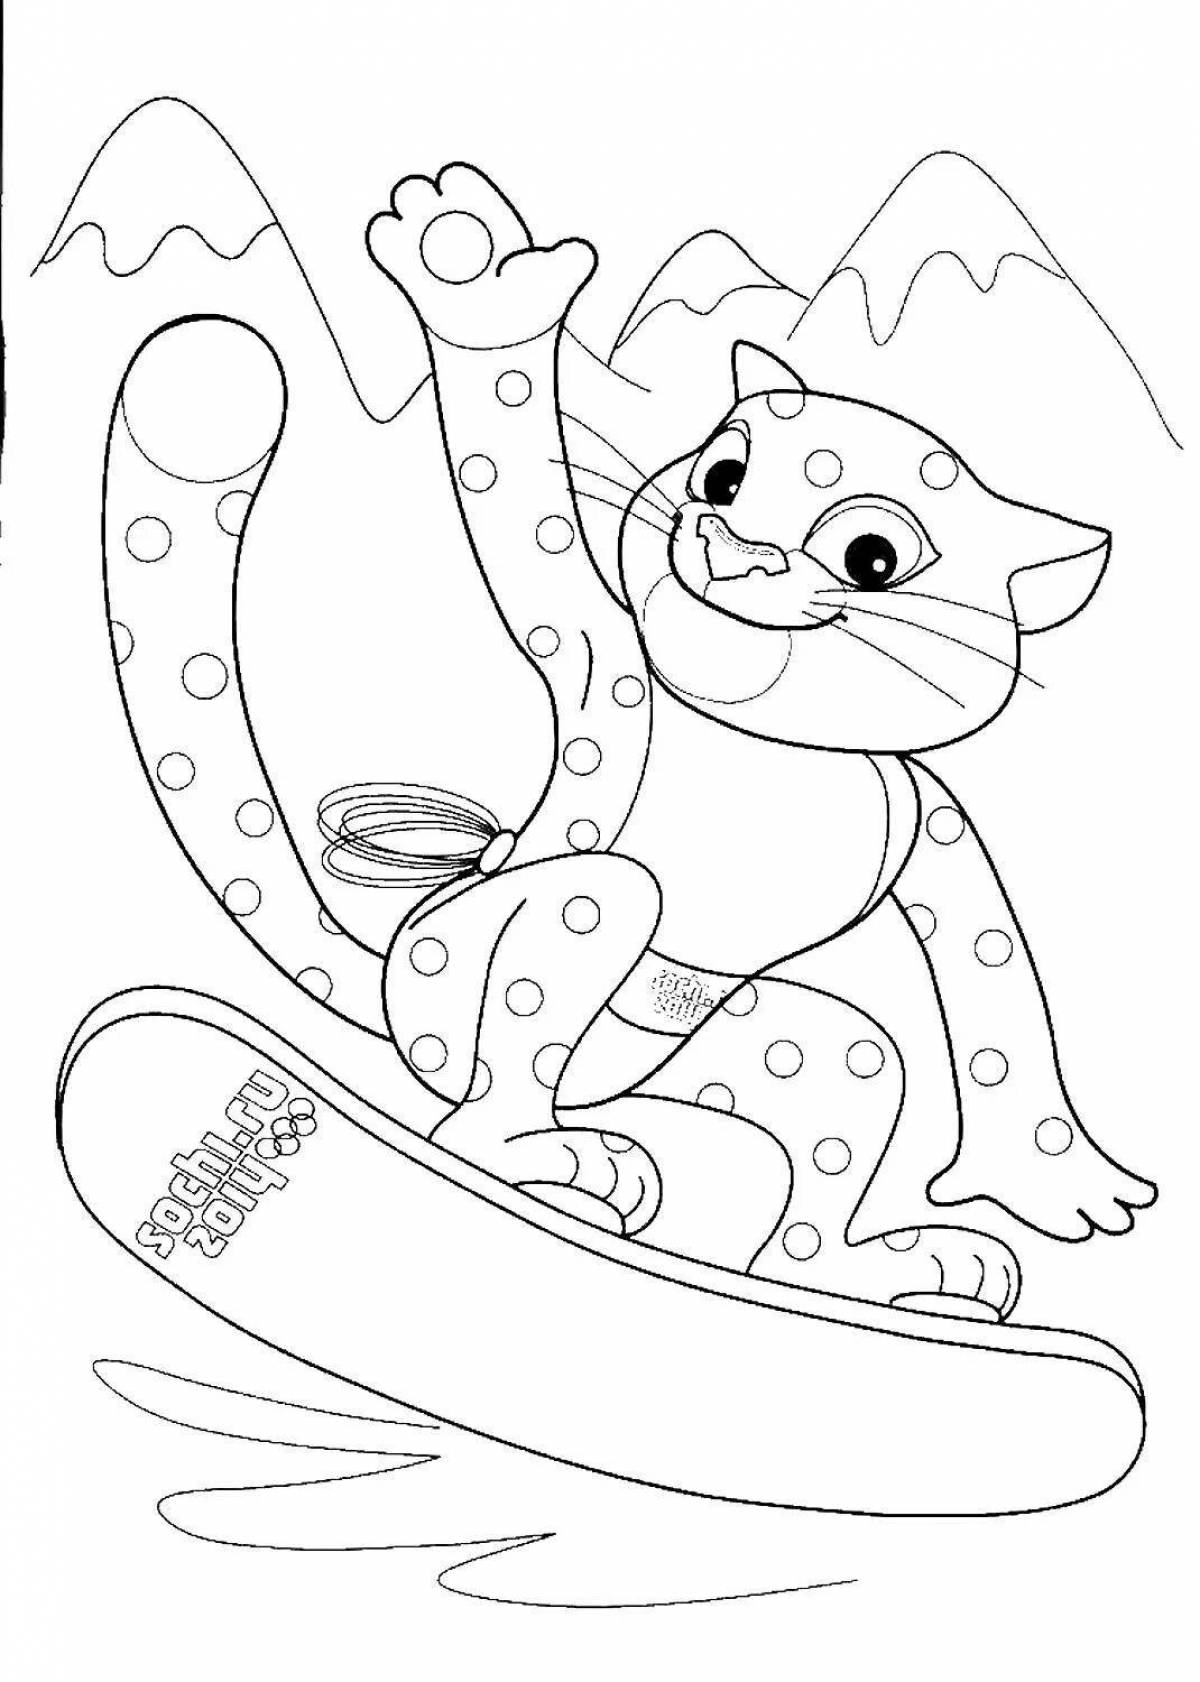 Coloring page charming winter olympiad